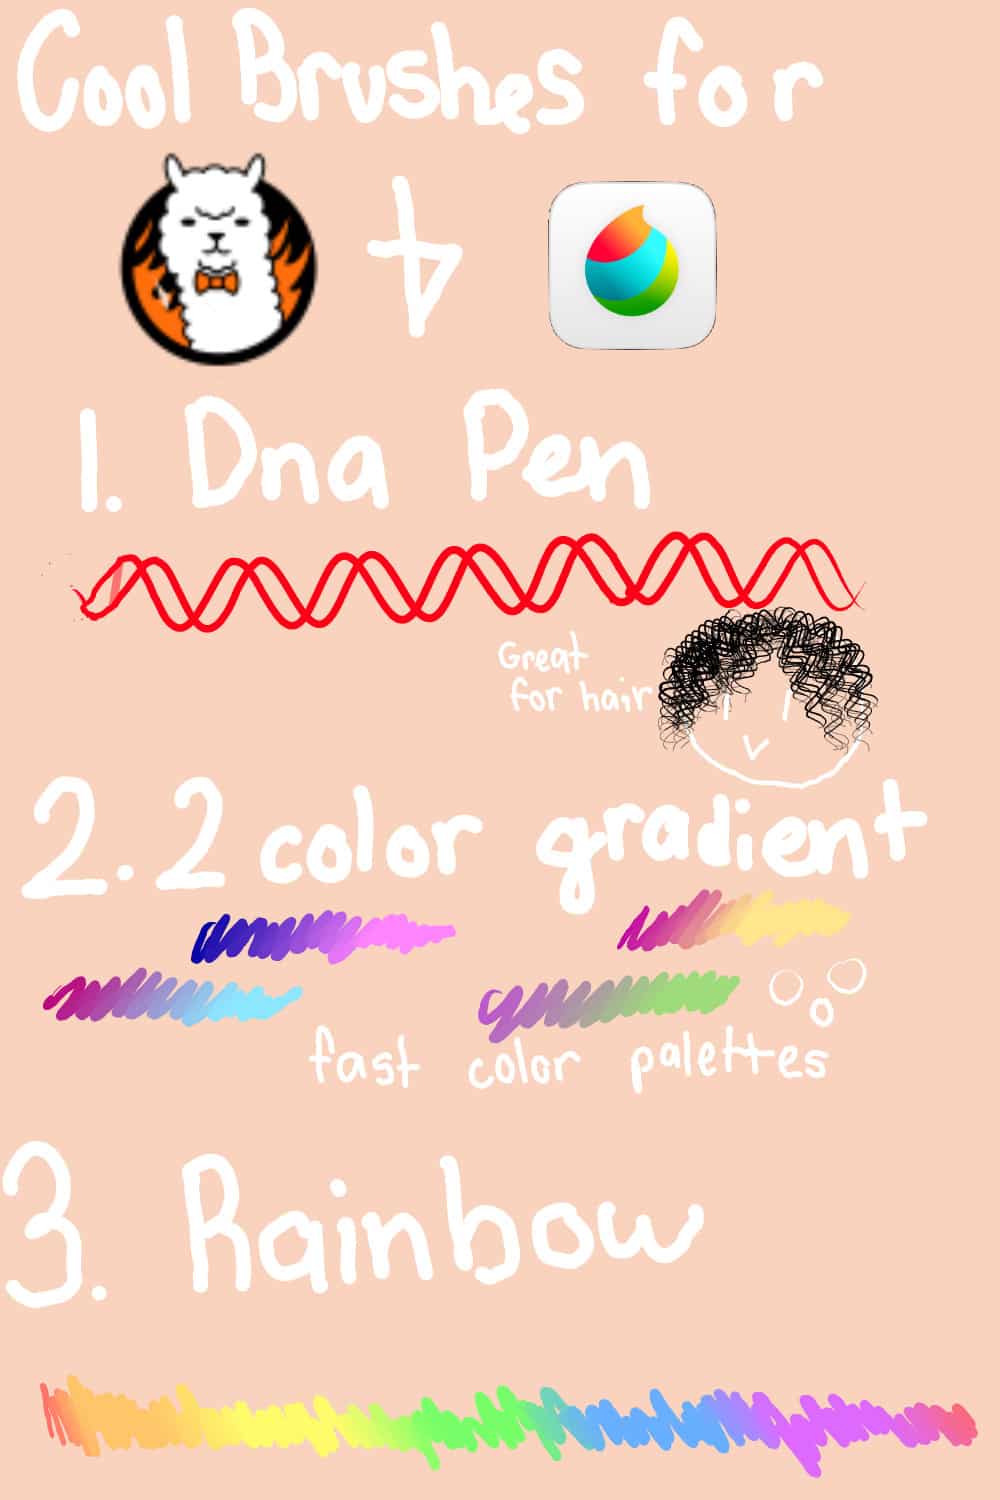 DNA Pen, 2-Color Gradient, and Rainbow Brushes